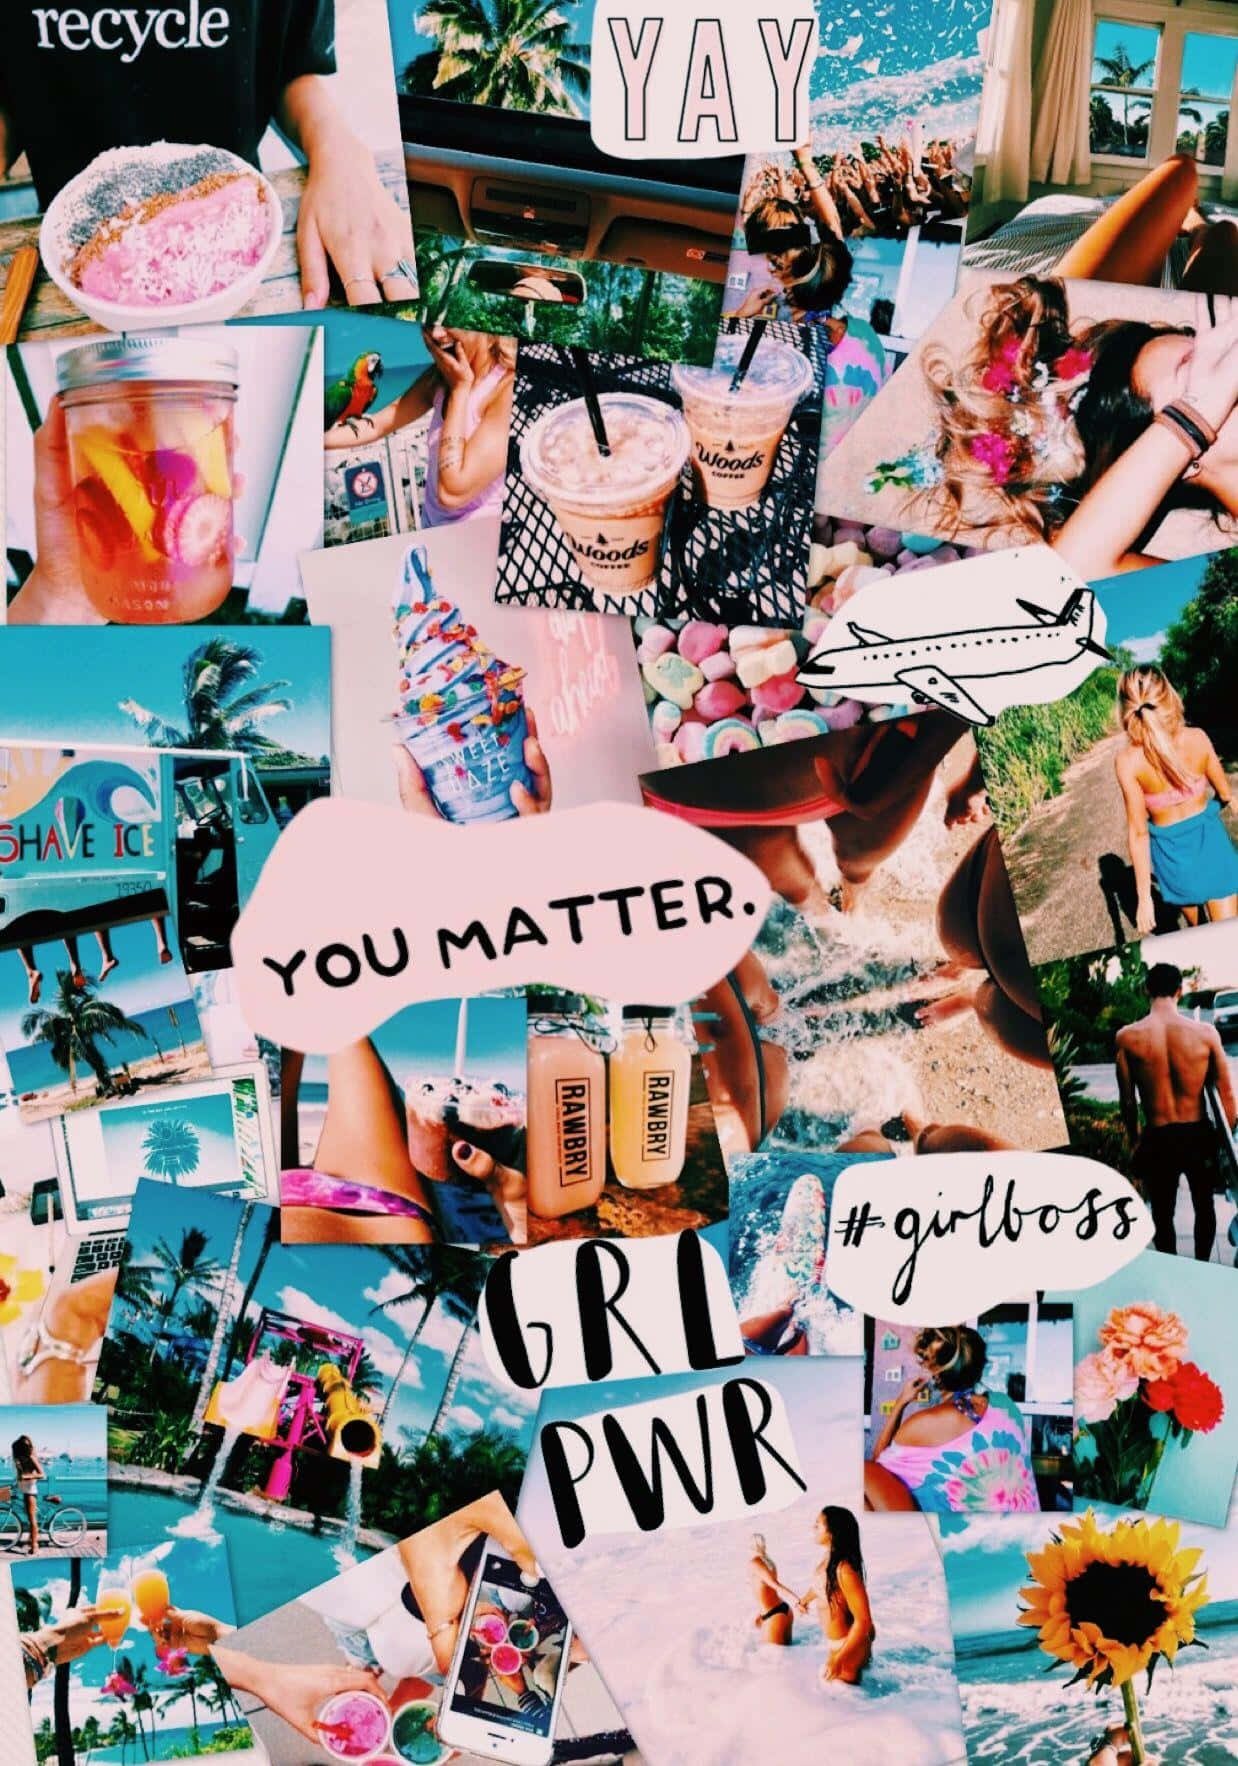 A Collage Of Photos With The Words You Matter Girl Power